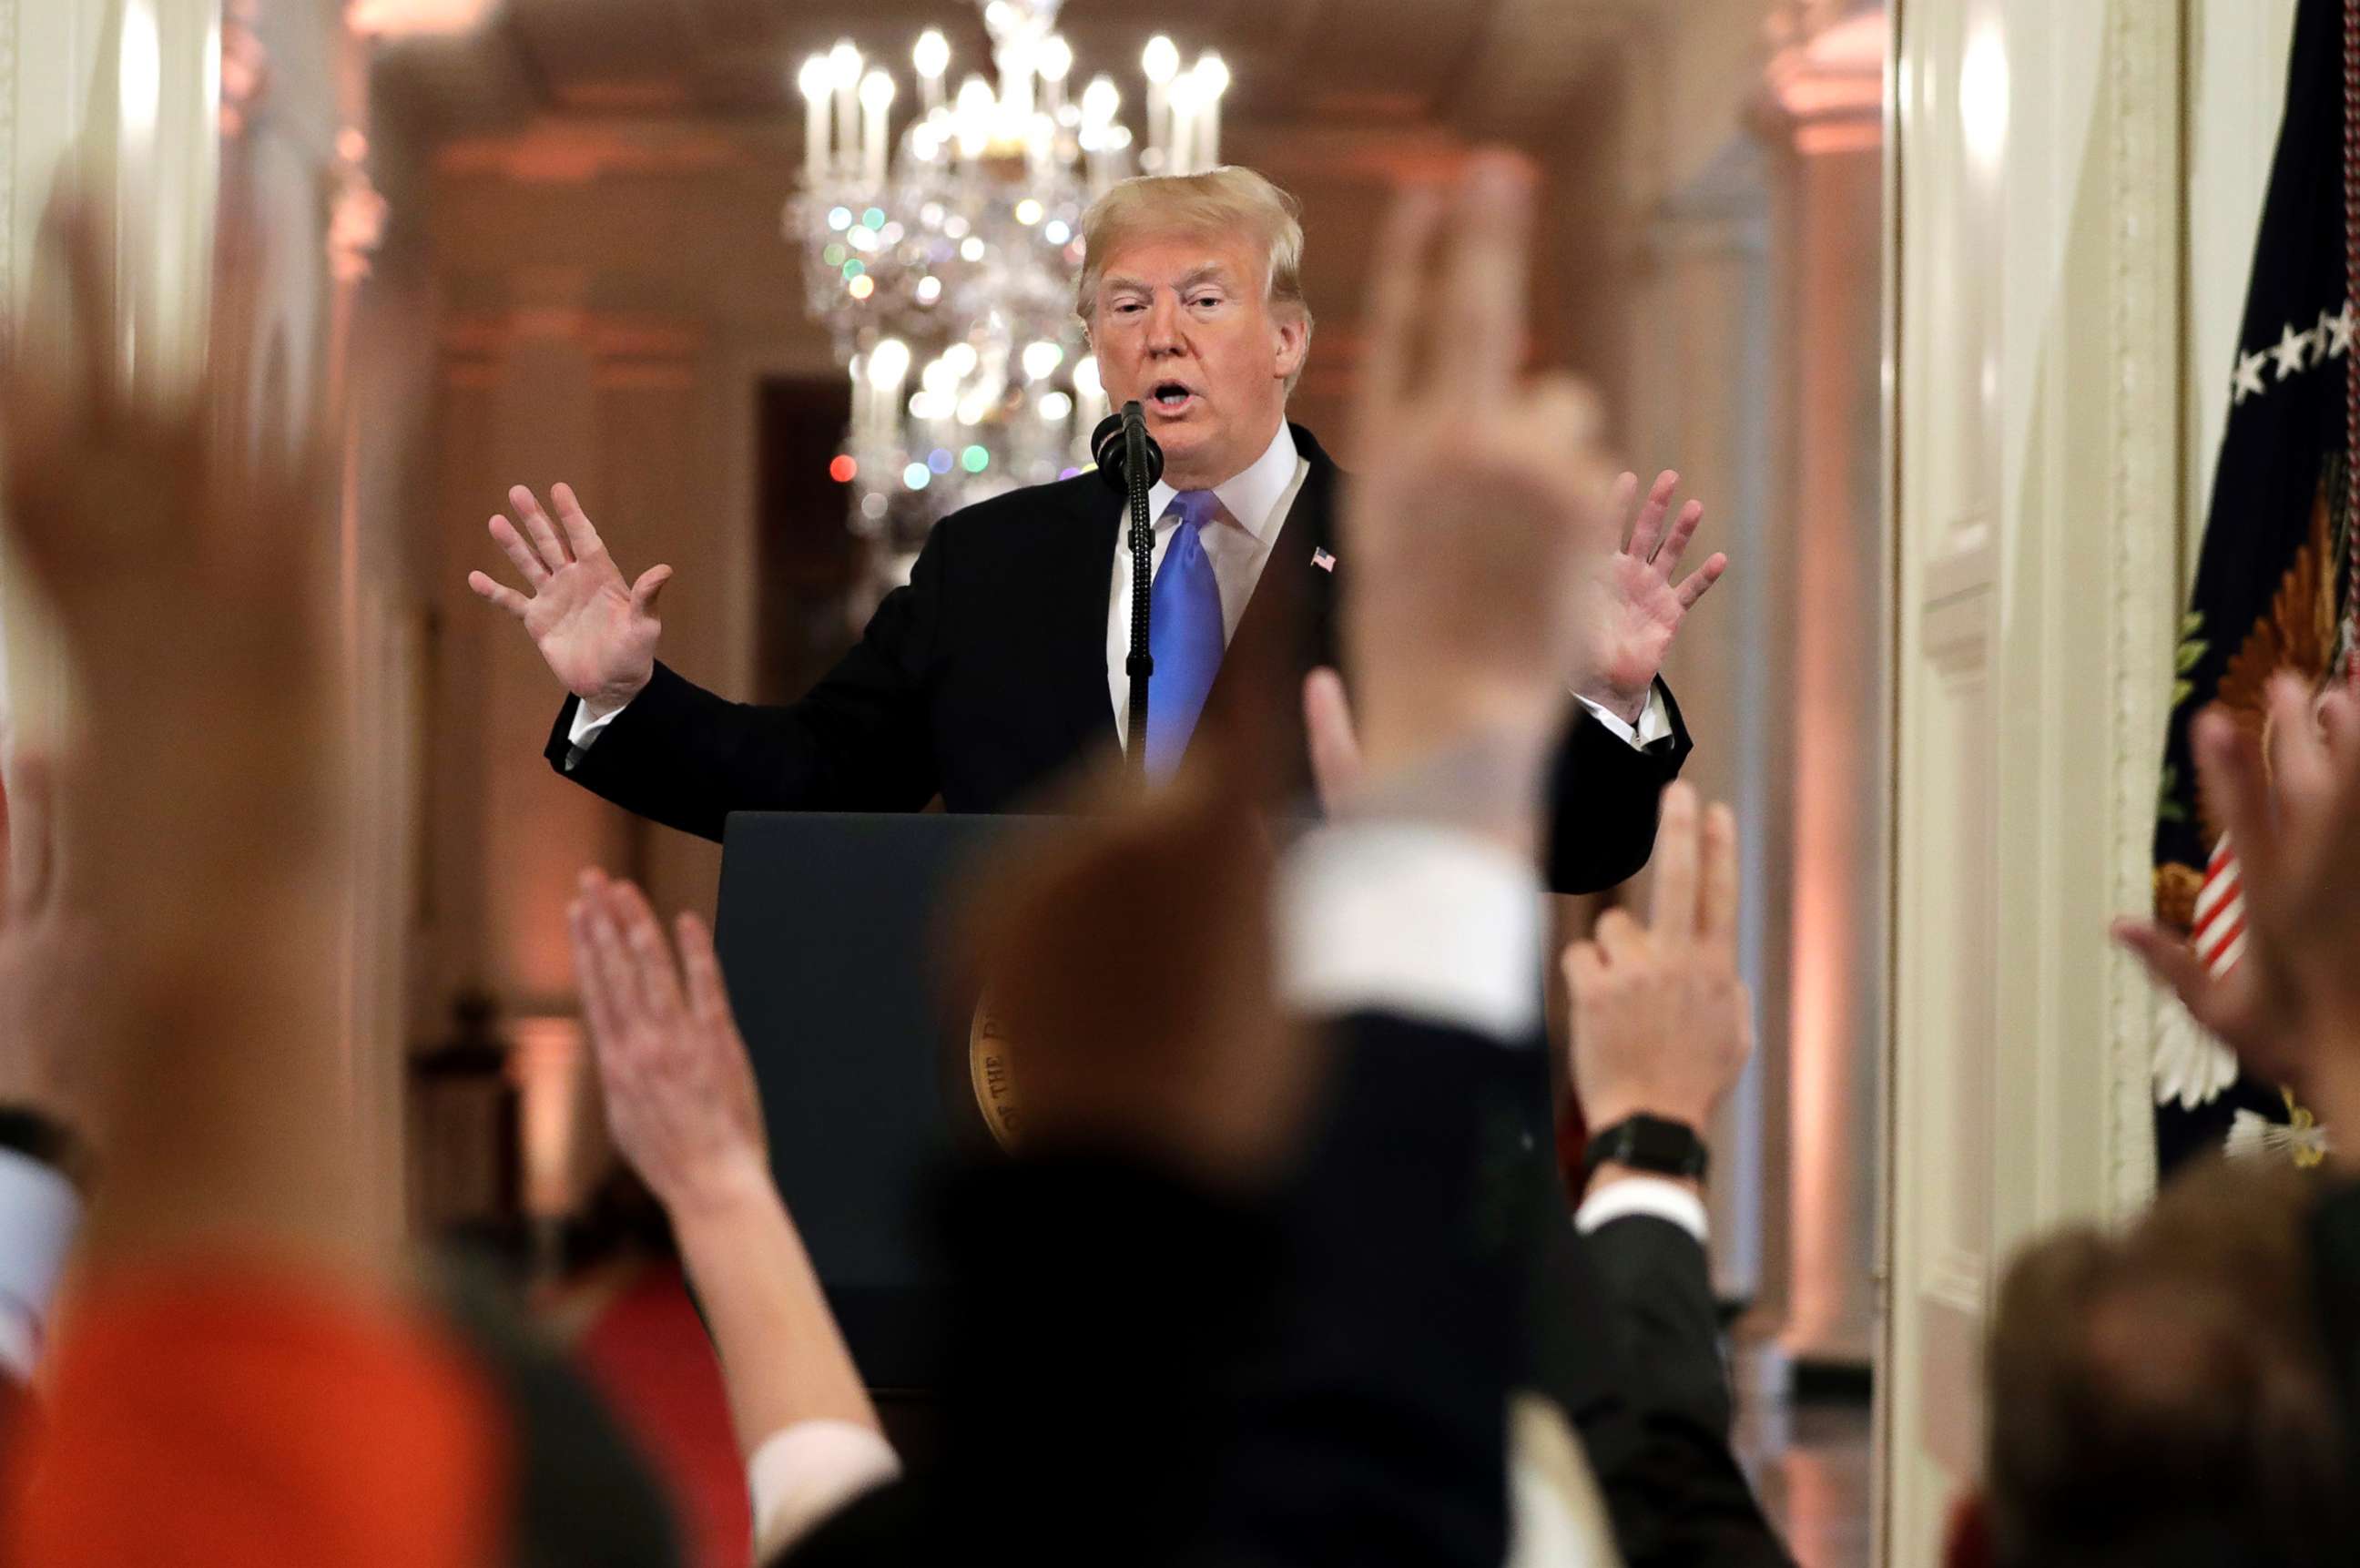 PHOTO: President Donald Trump reacts as reporters raise their hands to ask questions during a news conference in the East Room of the White House, Nov. 7, 2018, in Washington.